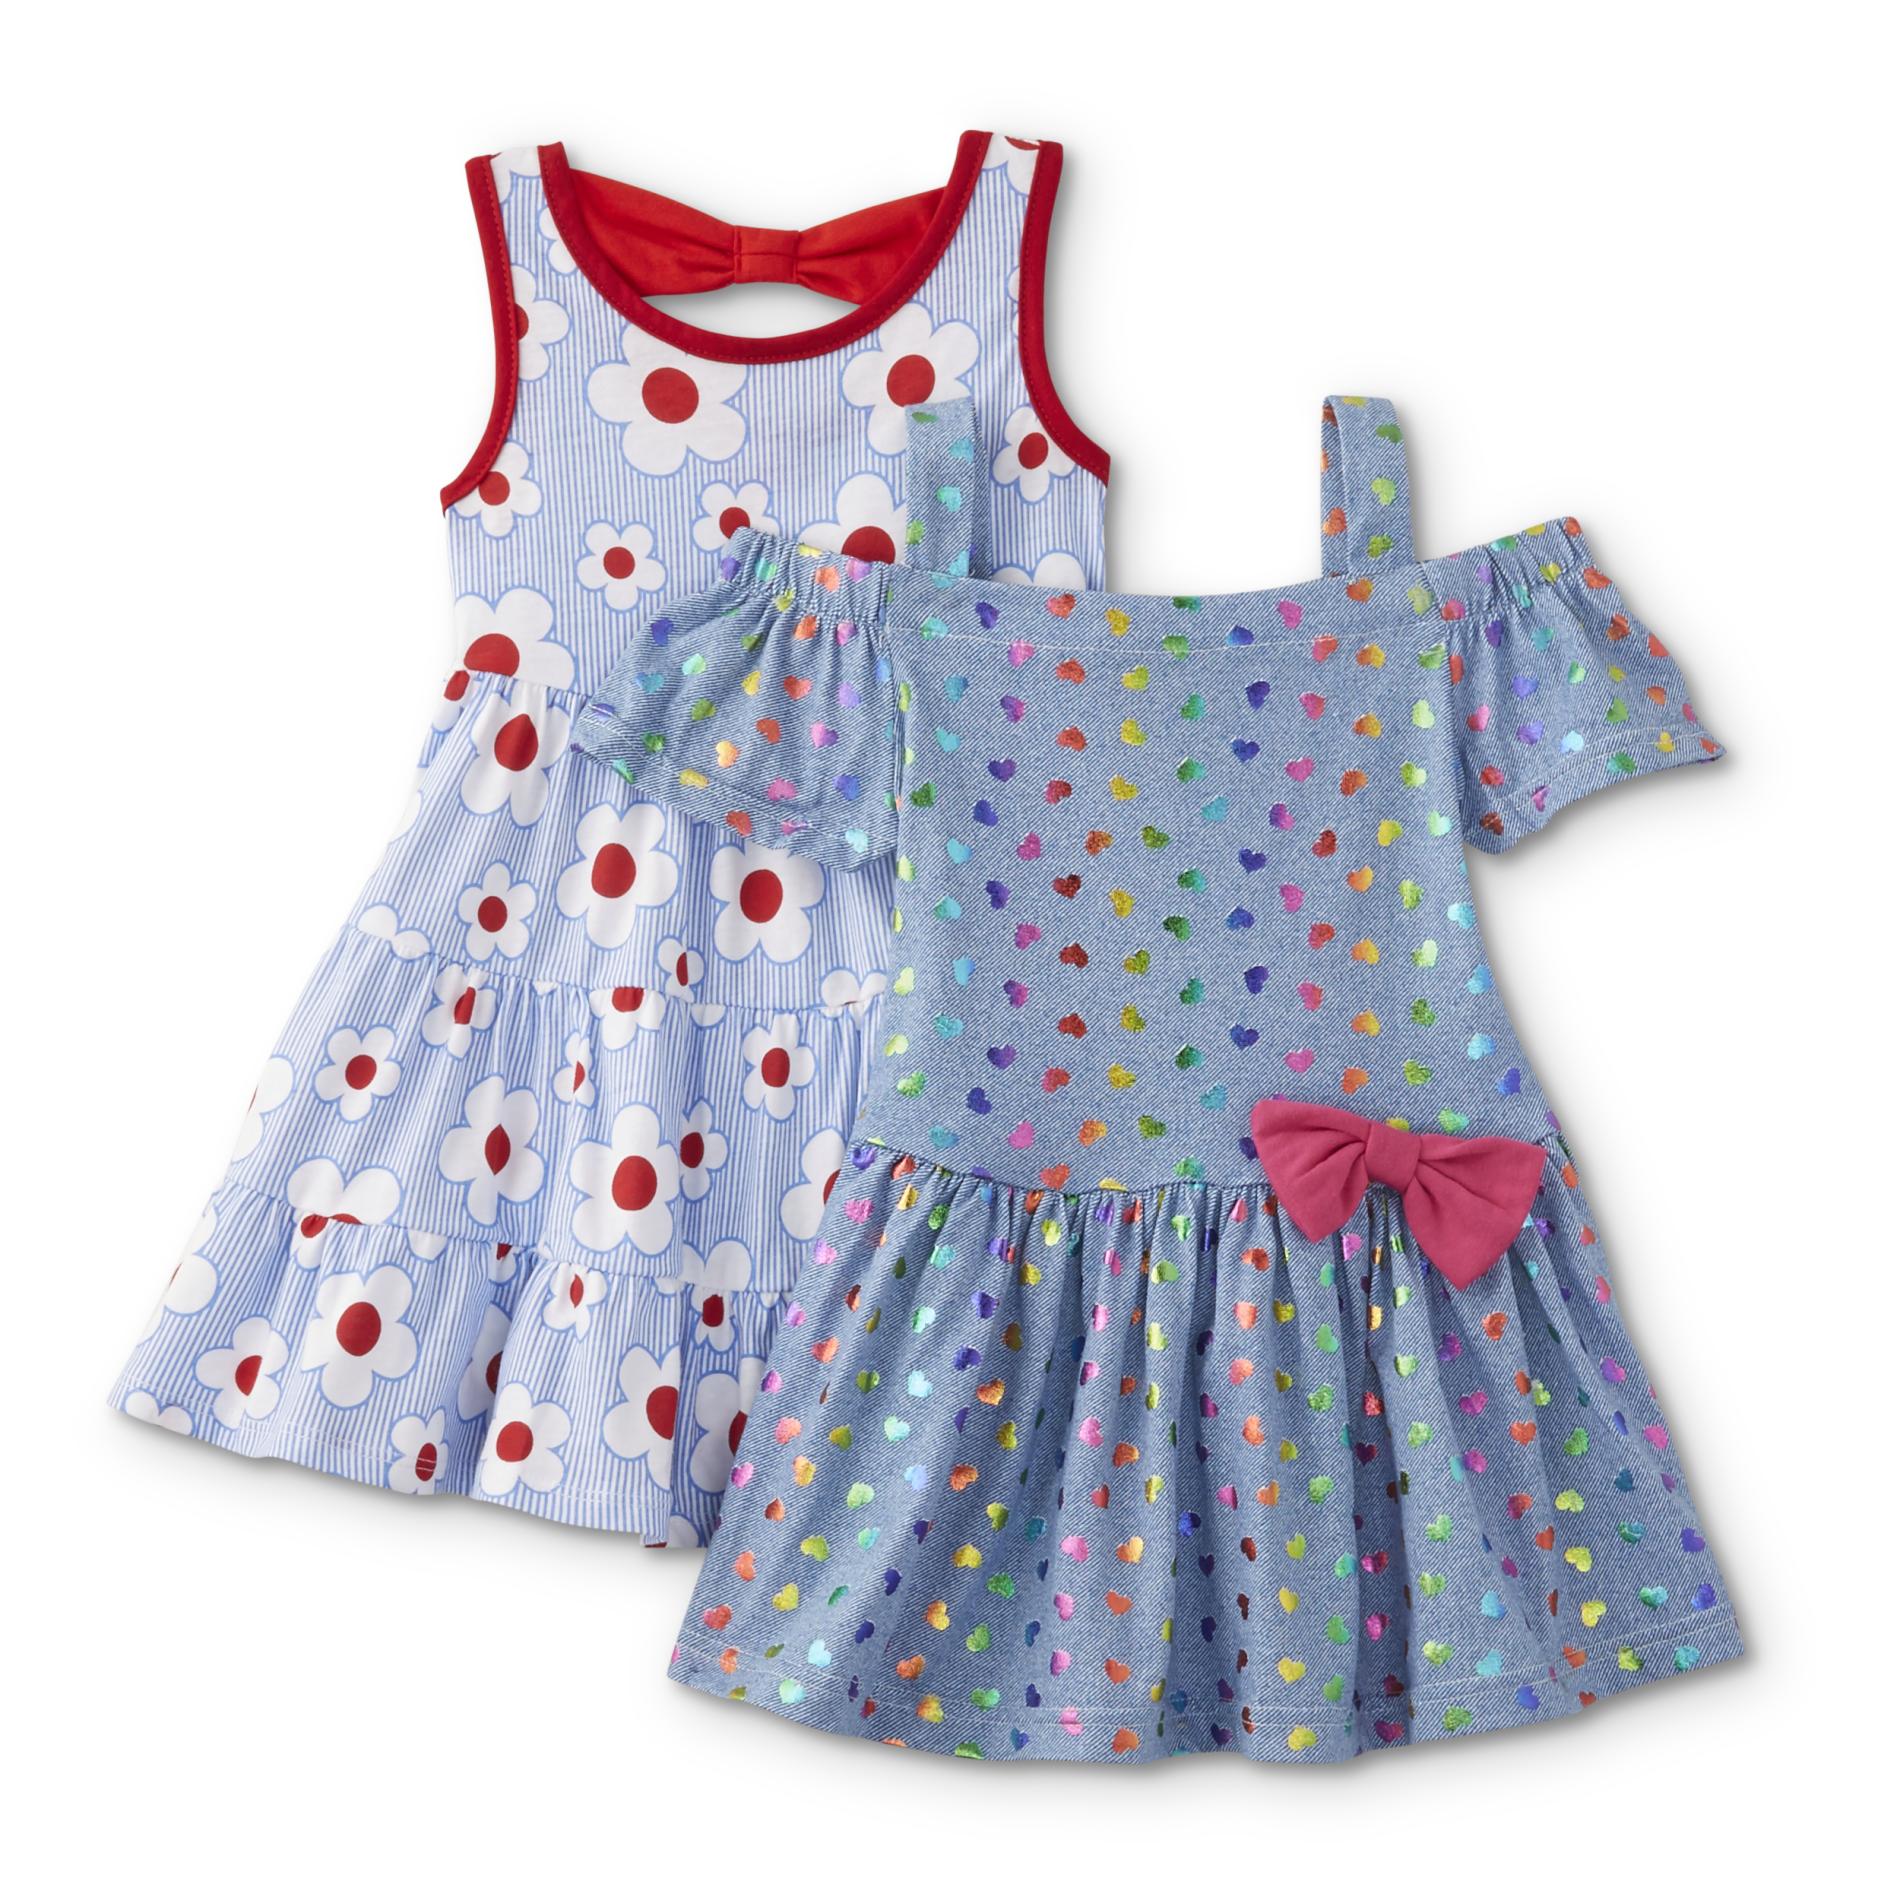 Toddler Girls' 2-Pack Dresses - Hearts & Daisies